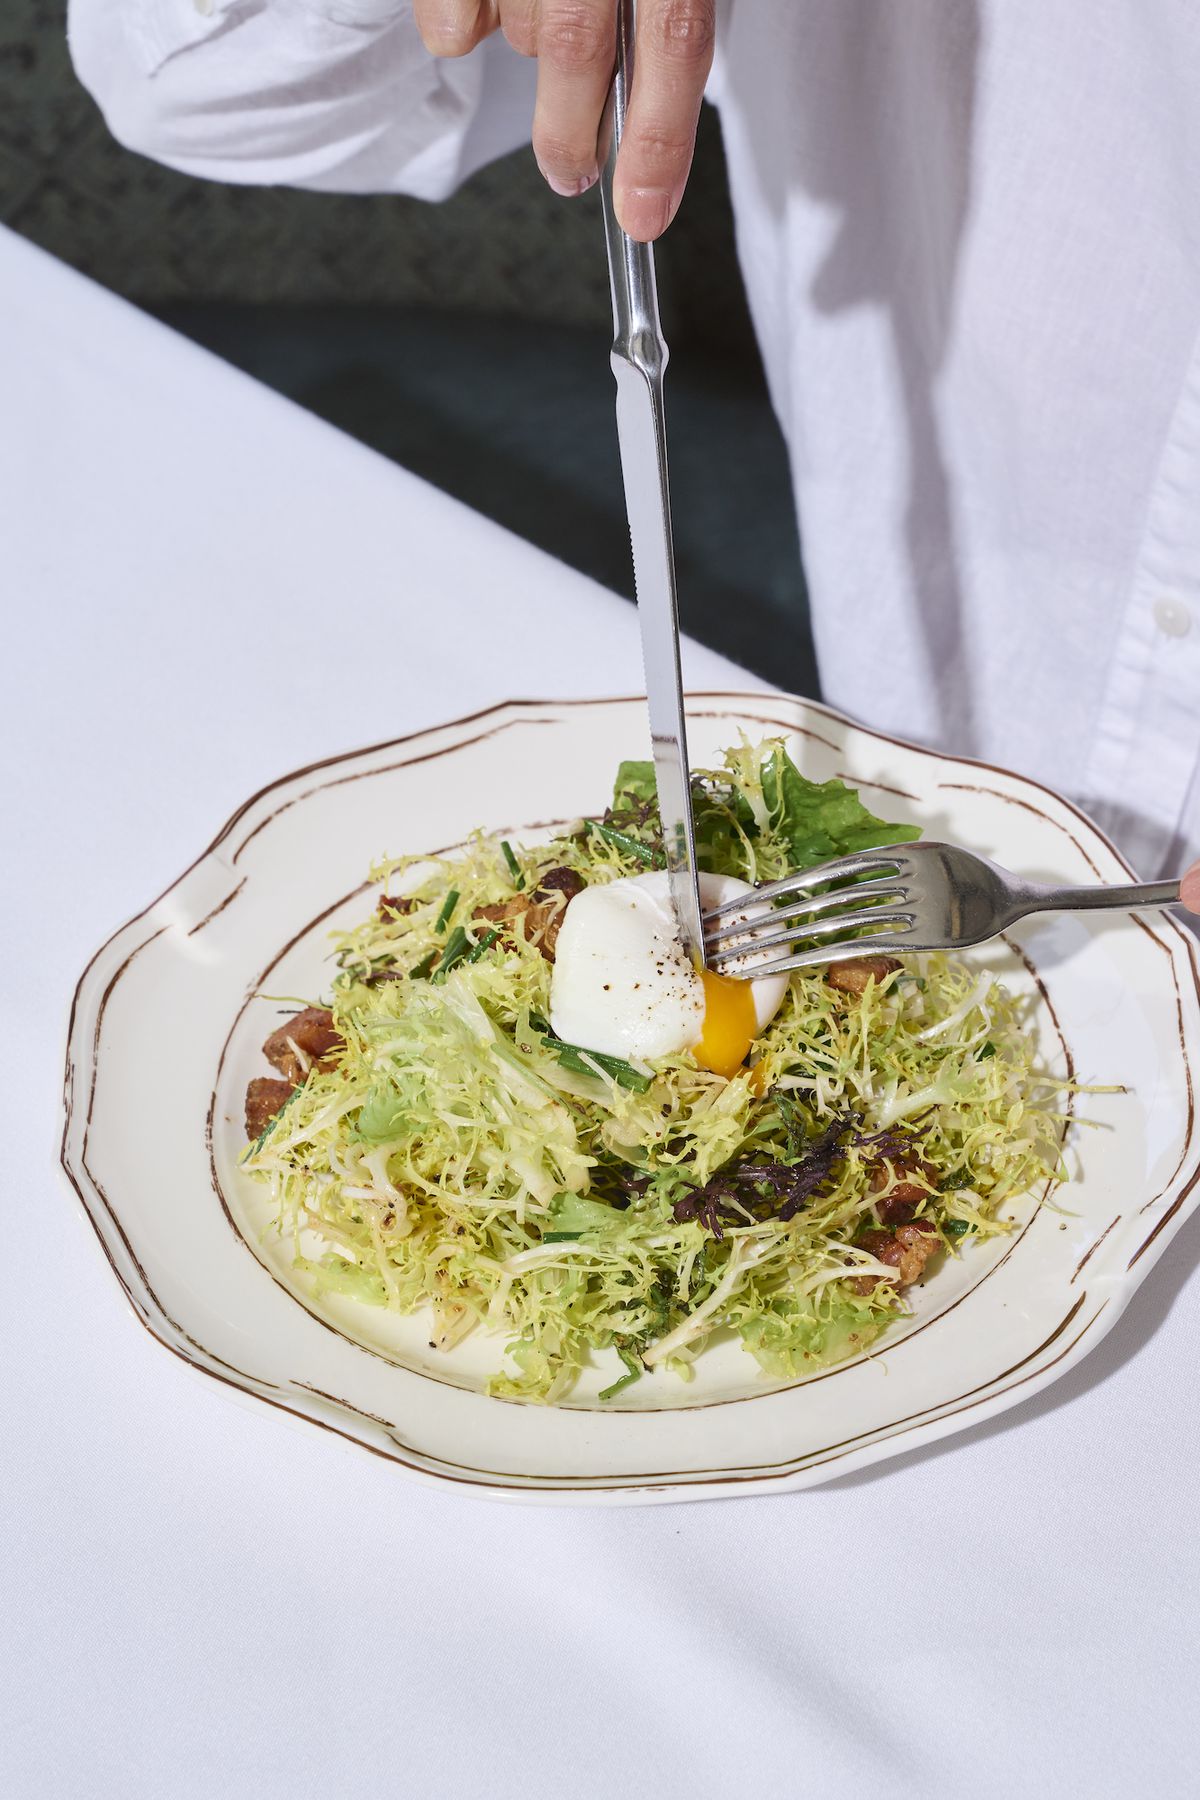 A frisee salad with soft egg with a knife going through it as a person in a white shirt cuts, inside a new restaurant Shirley Brasserie in Hollywood.